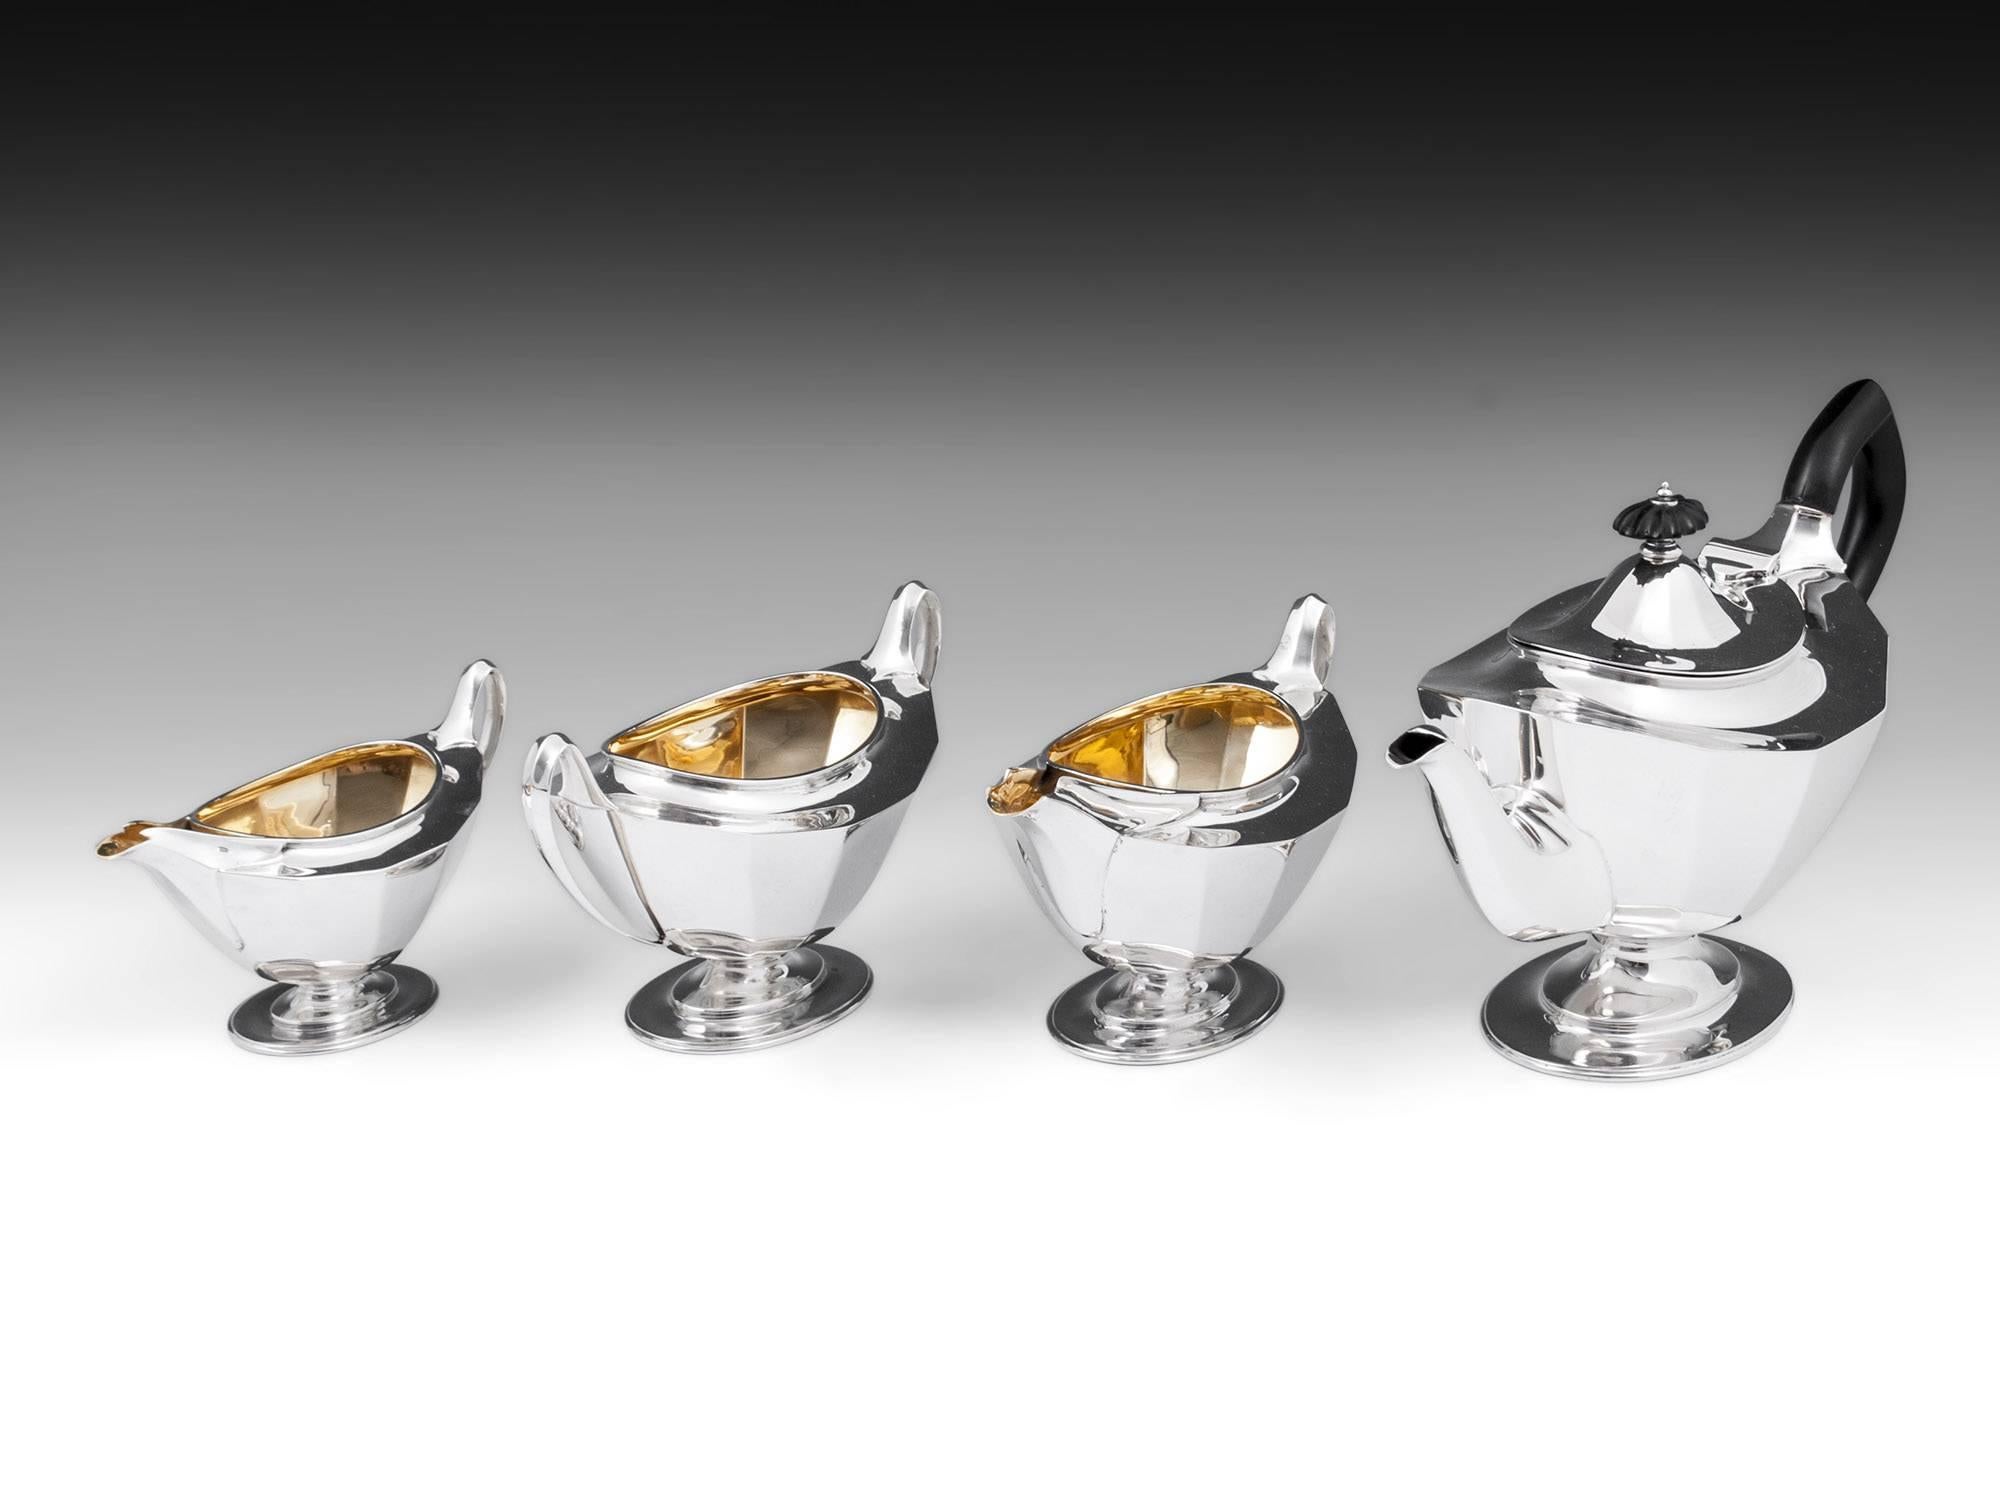 British Art Deco Sterling Silver Tea Set with Ebony Handles, 20th Century For Sale